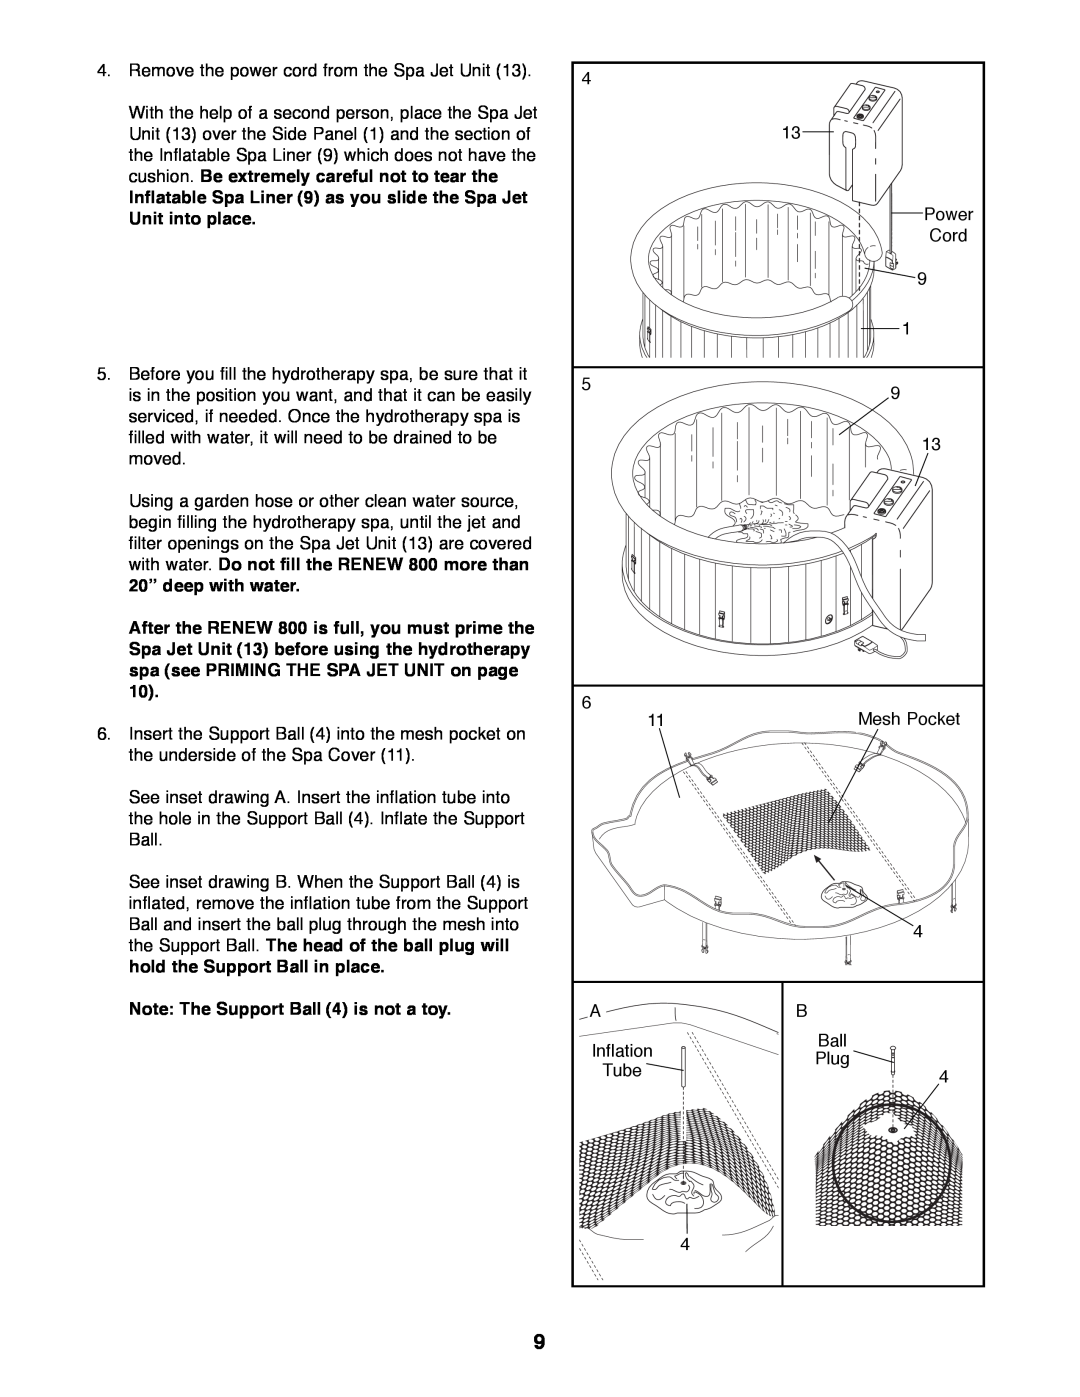 Image IMHS80081 manual Note The Support Ball 4 is not a toy 